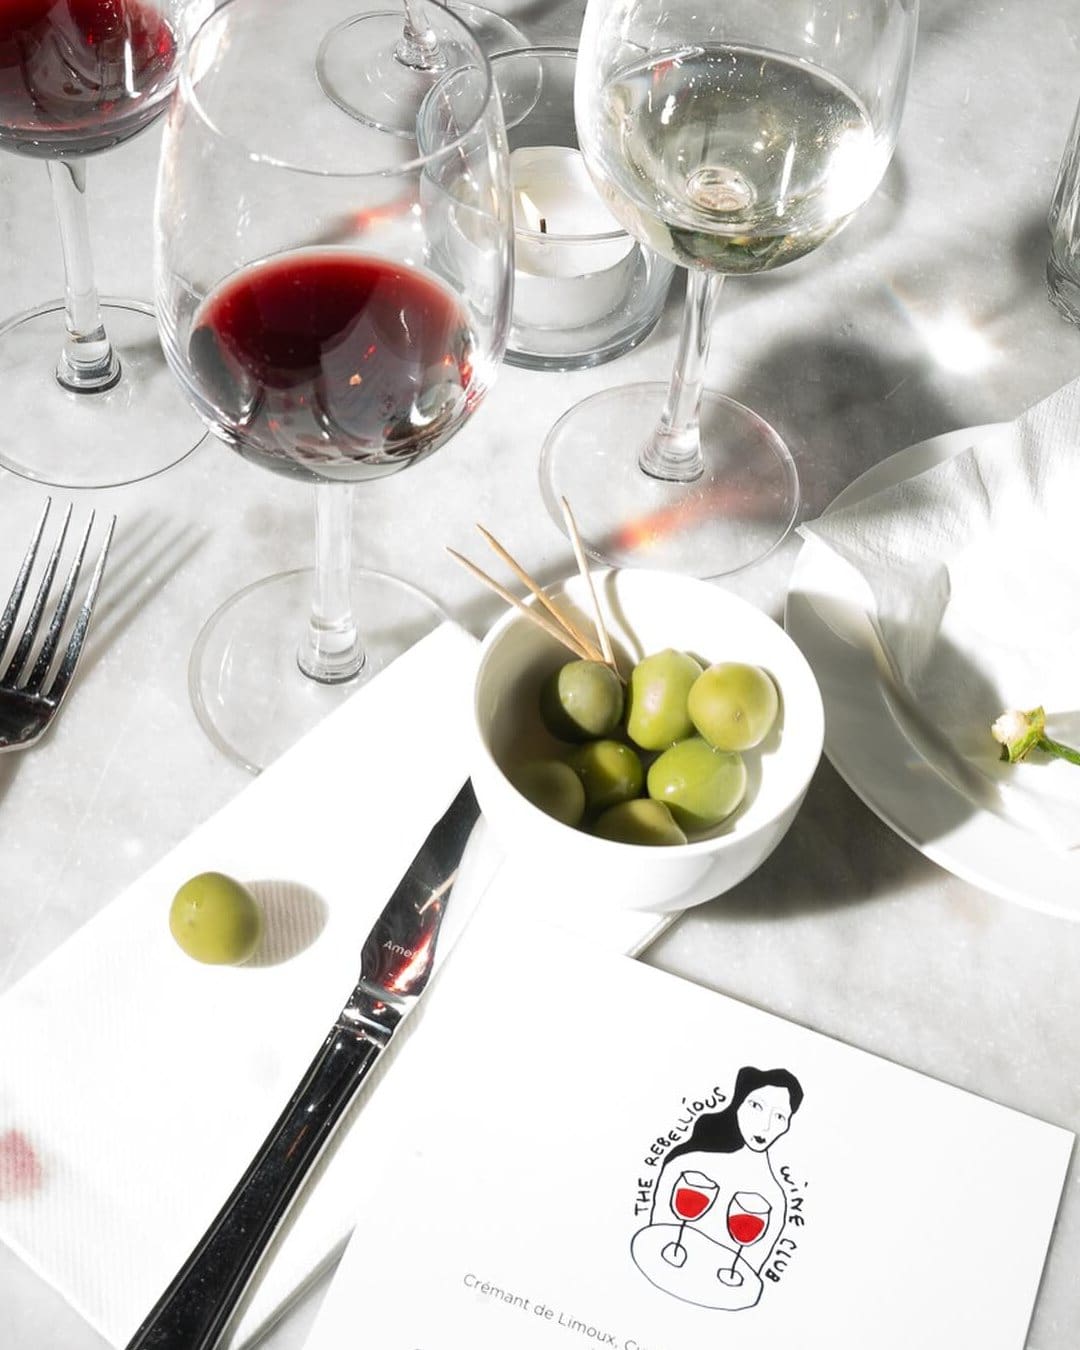 Red wine, olives and an illustrated menu decorates a table at The Rebellious Wine Club